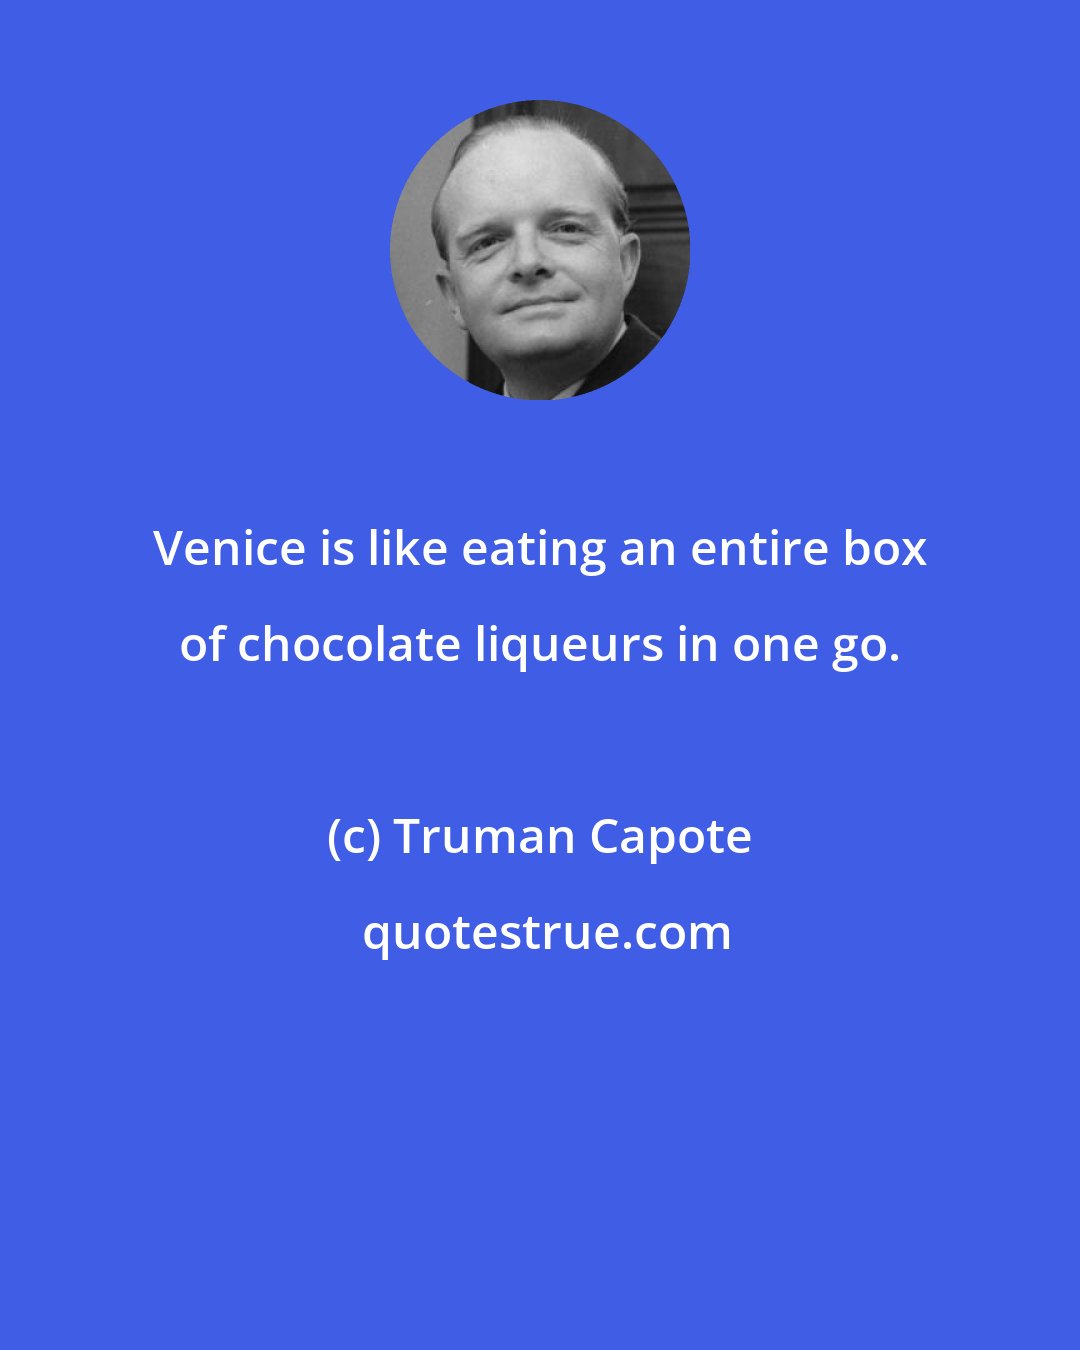 Truman Capote: Venice is like eating an entire box of chocolate liqueurs in one go.